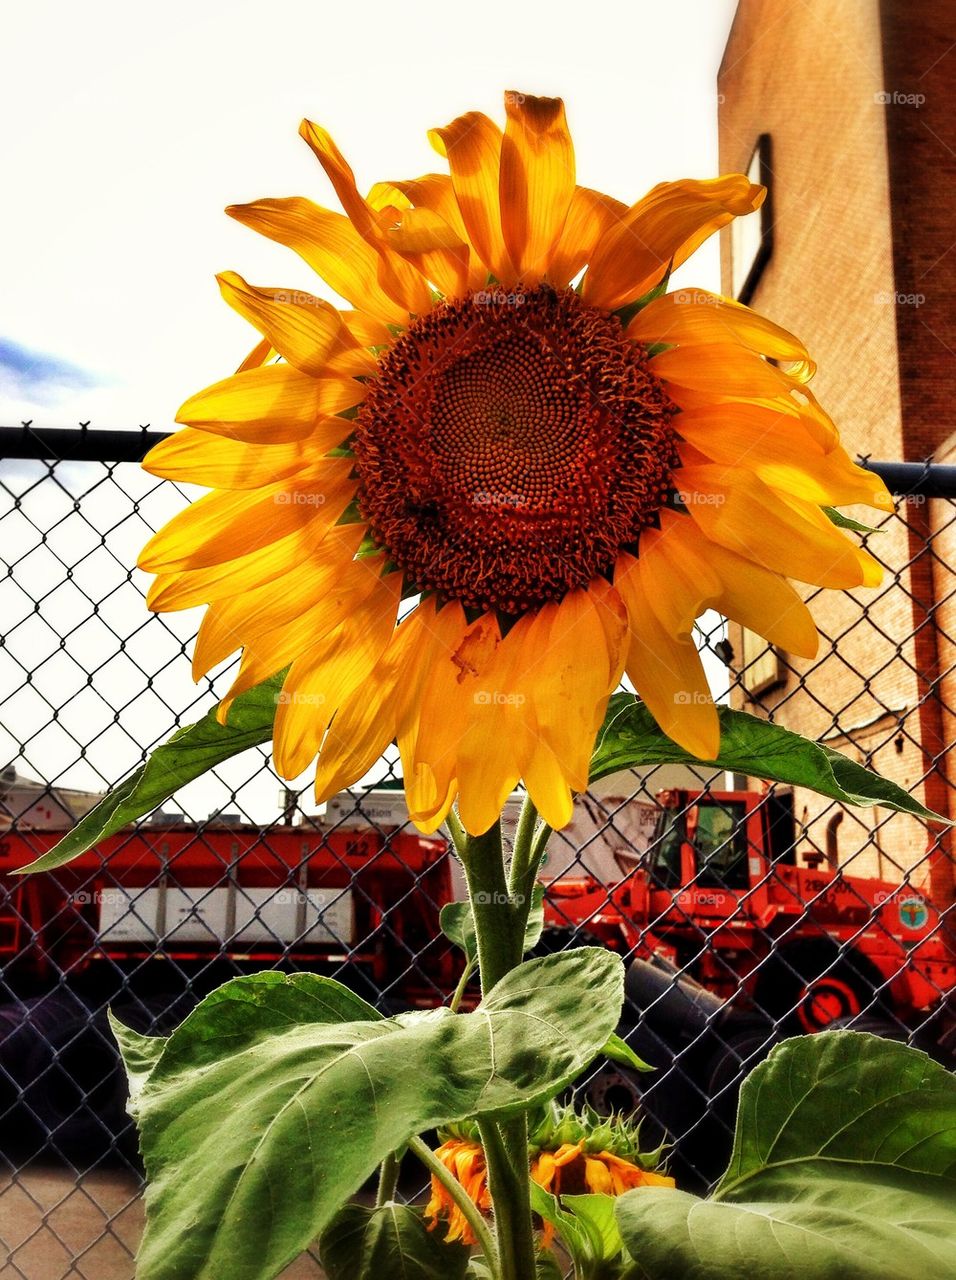 Sunflower at Chelsea Piers